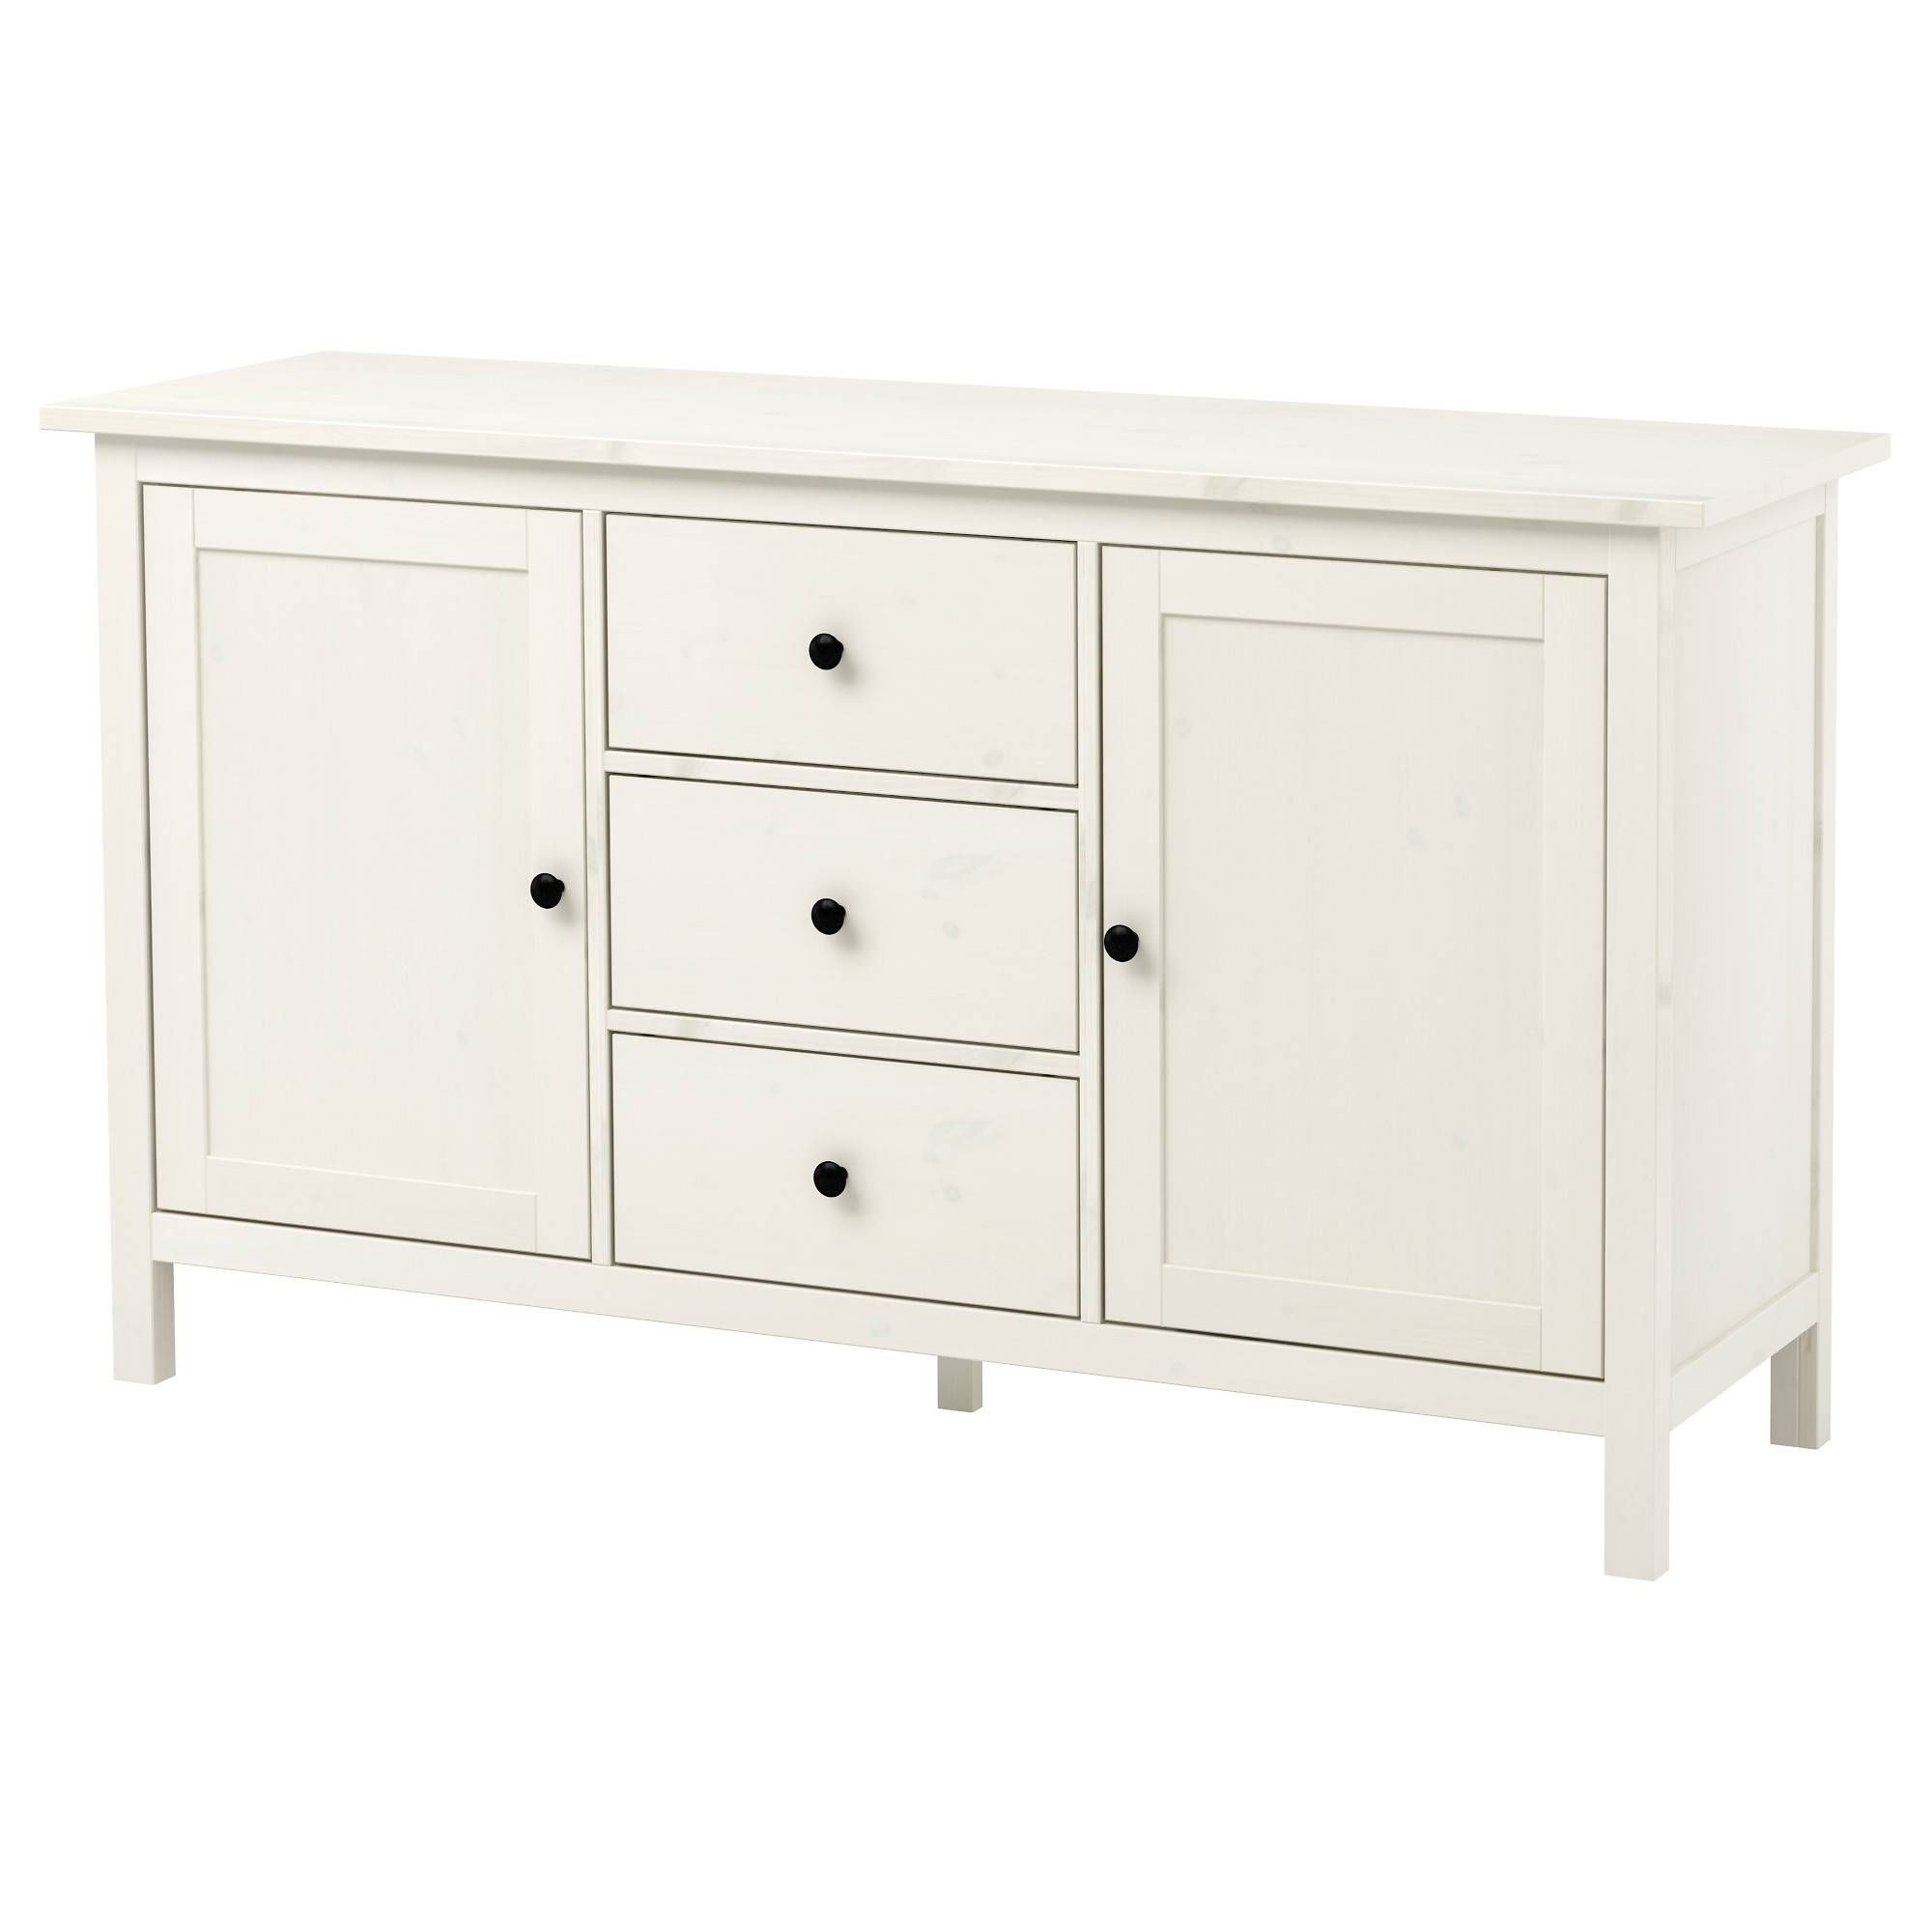 Hemnes Sideboard – White Stain – Ikea With Regard To Sideboards With Drawers (View 5 of 15)